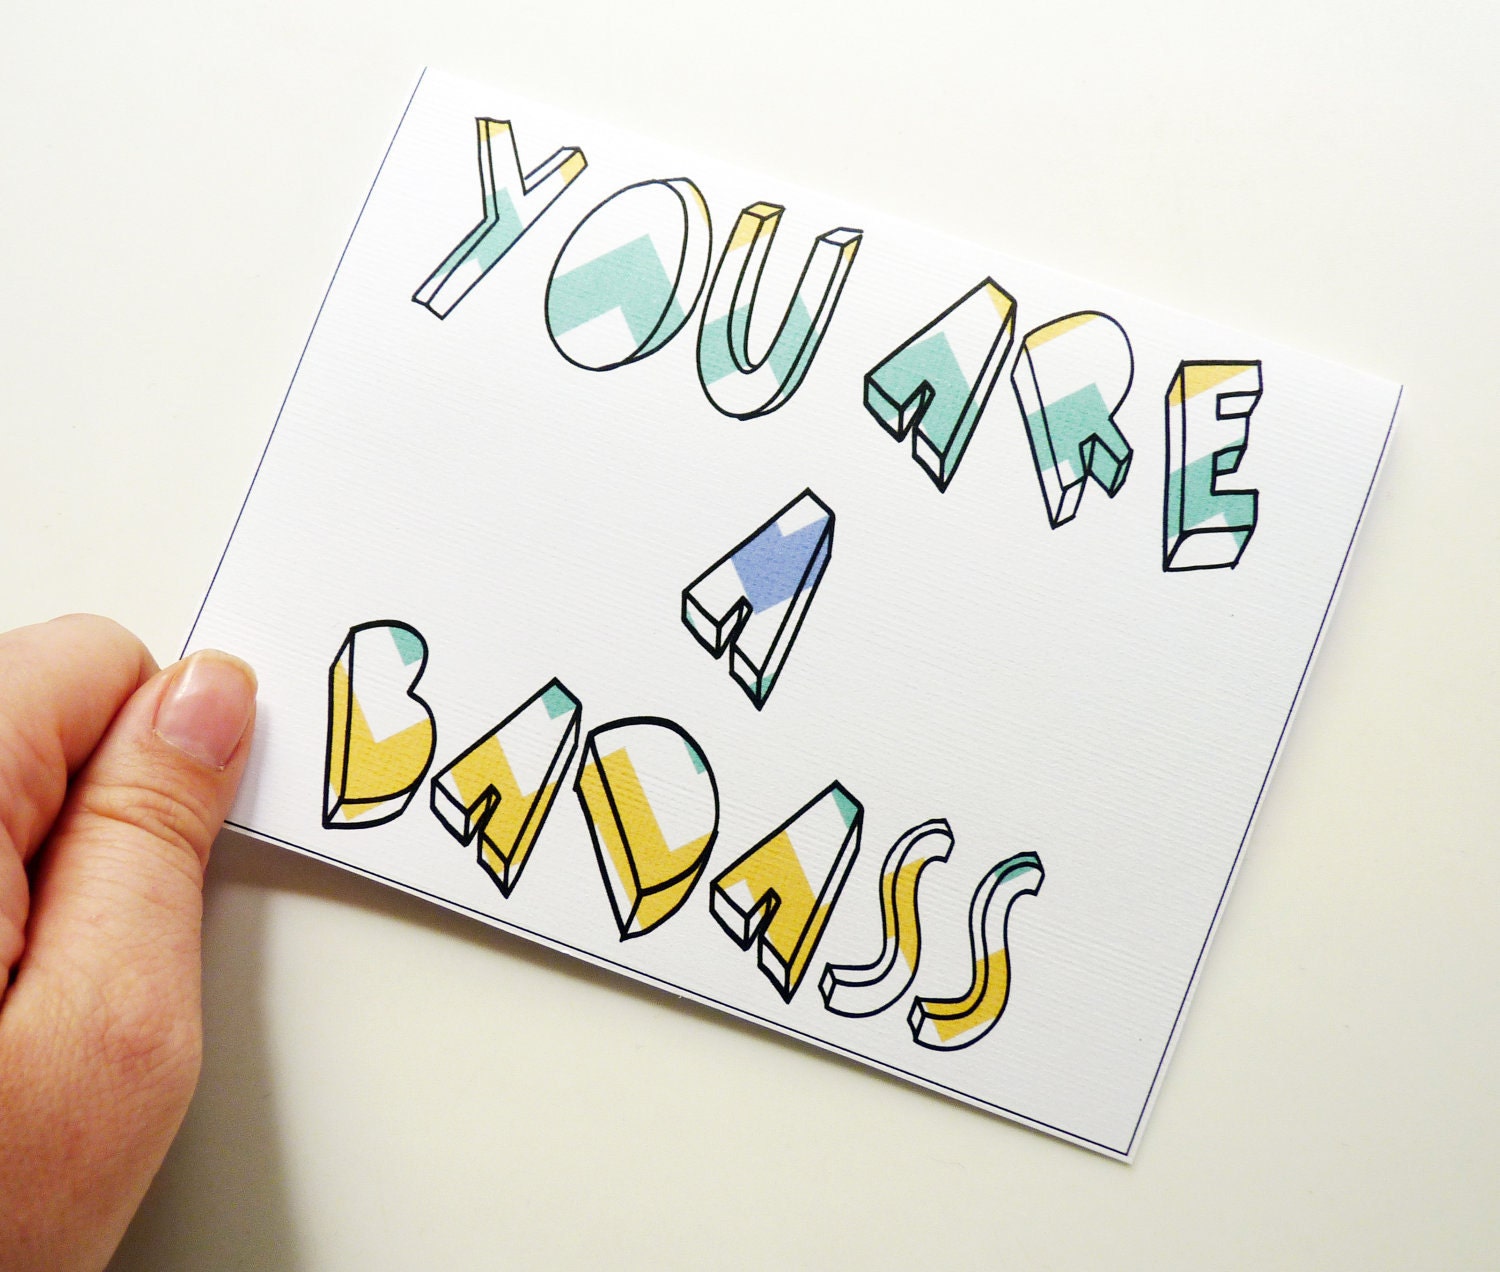 You Are A Badass - Textured Chevron Teal, Blue & Yellow Greeting Card - Father's Day, Congratulations, New Job, Graduation, Any Occassion